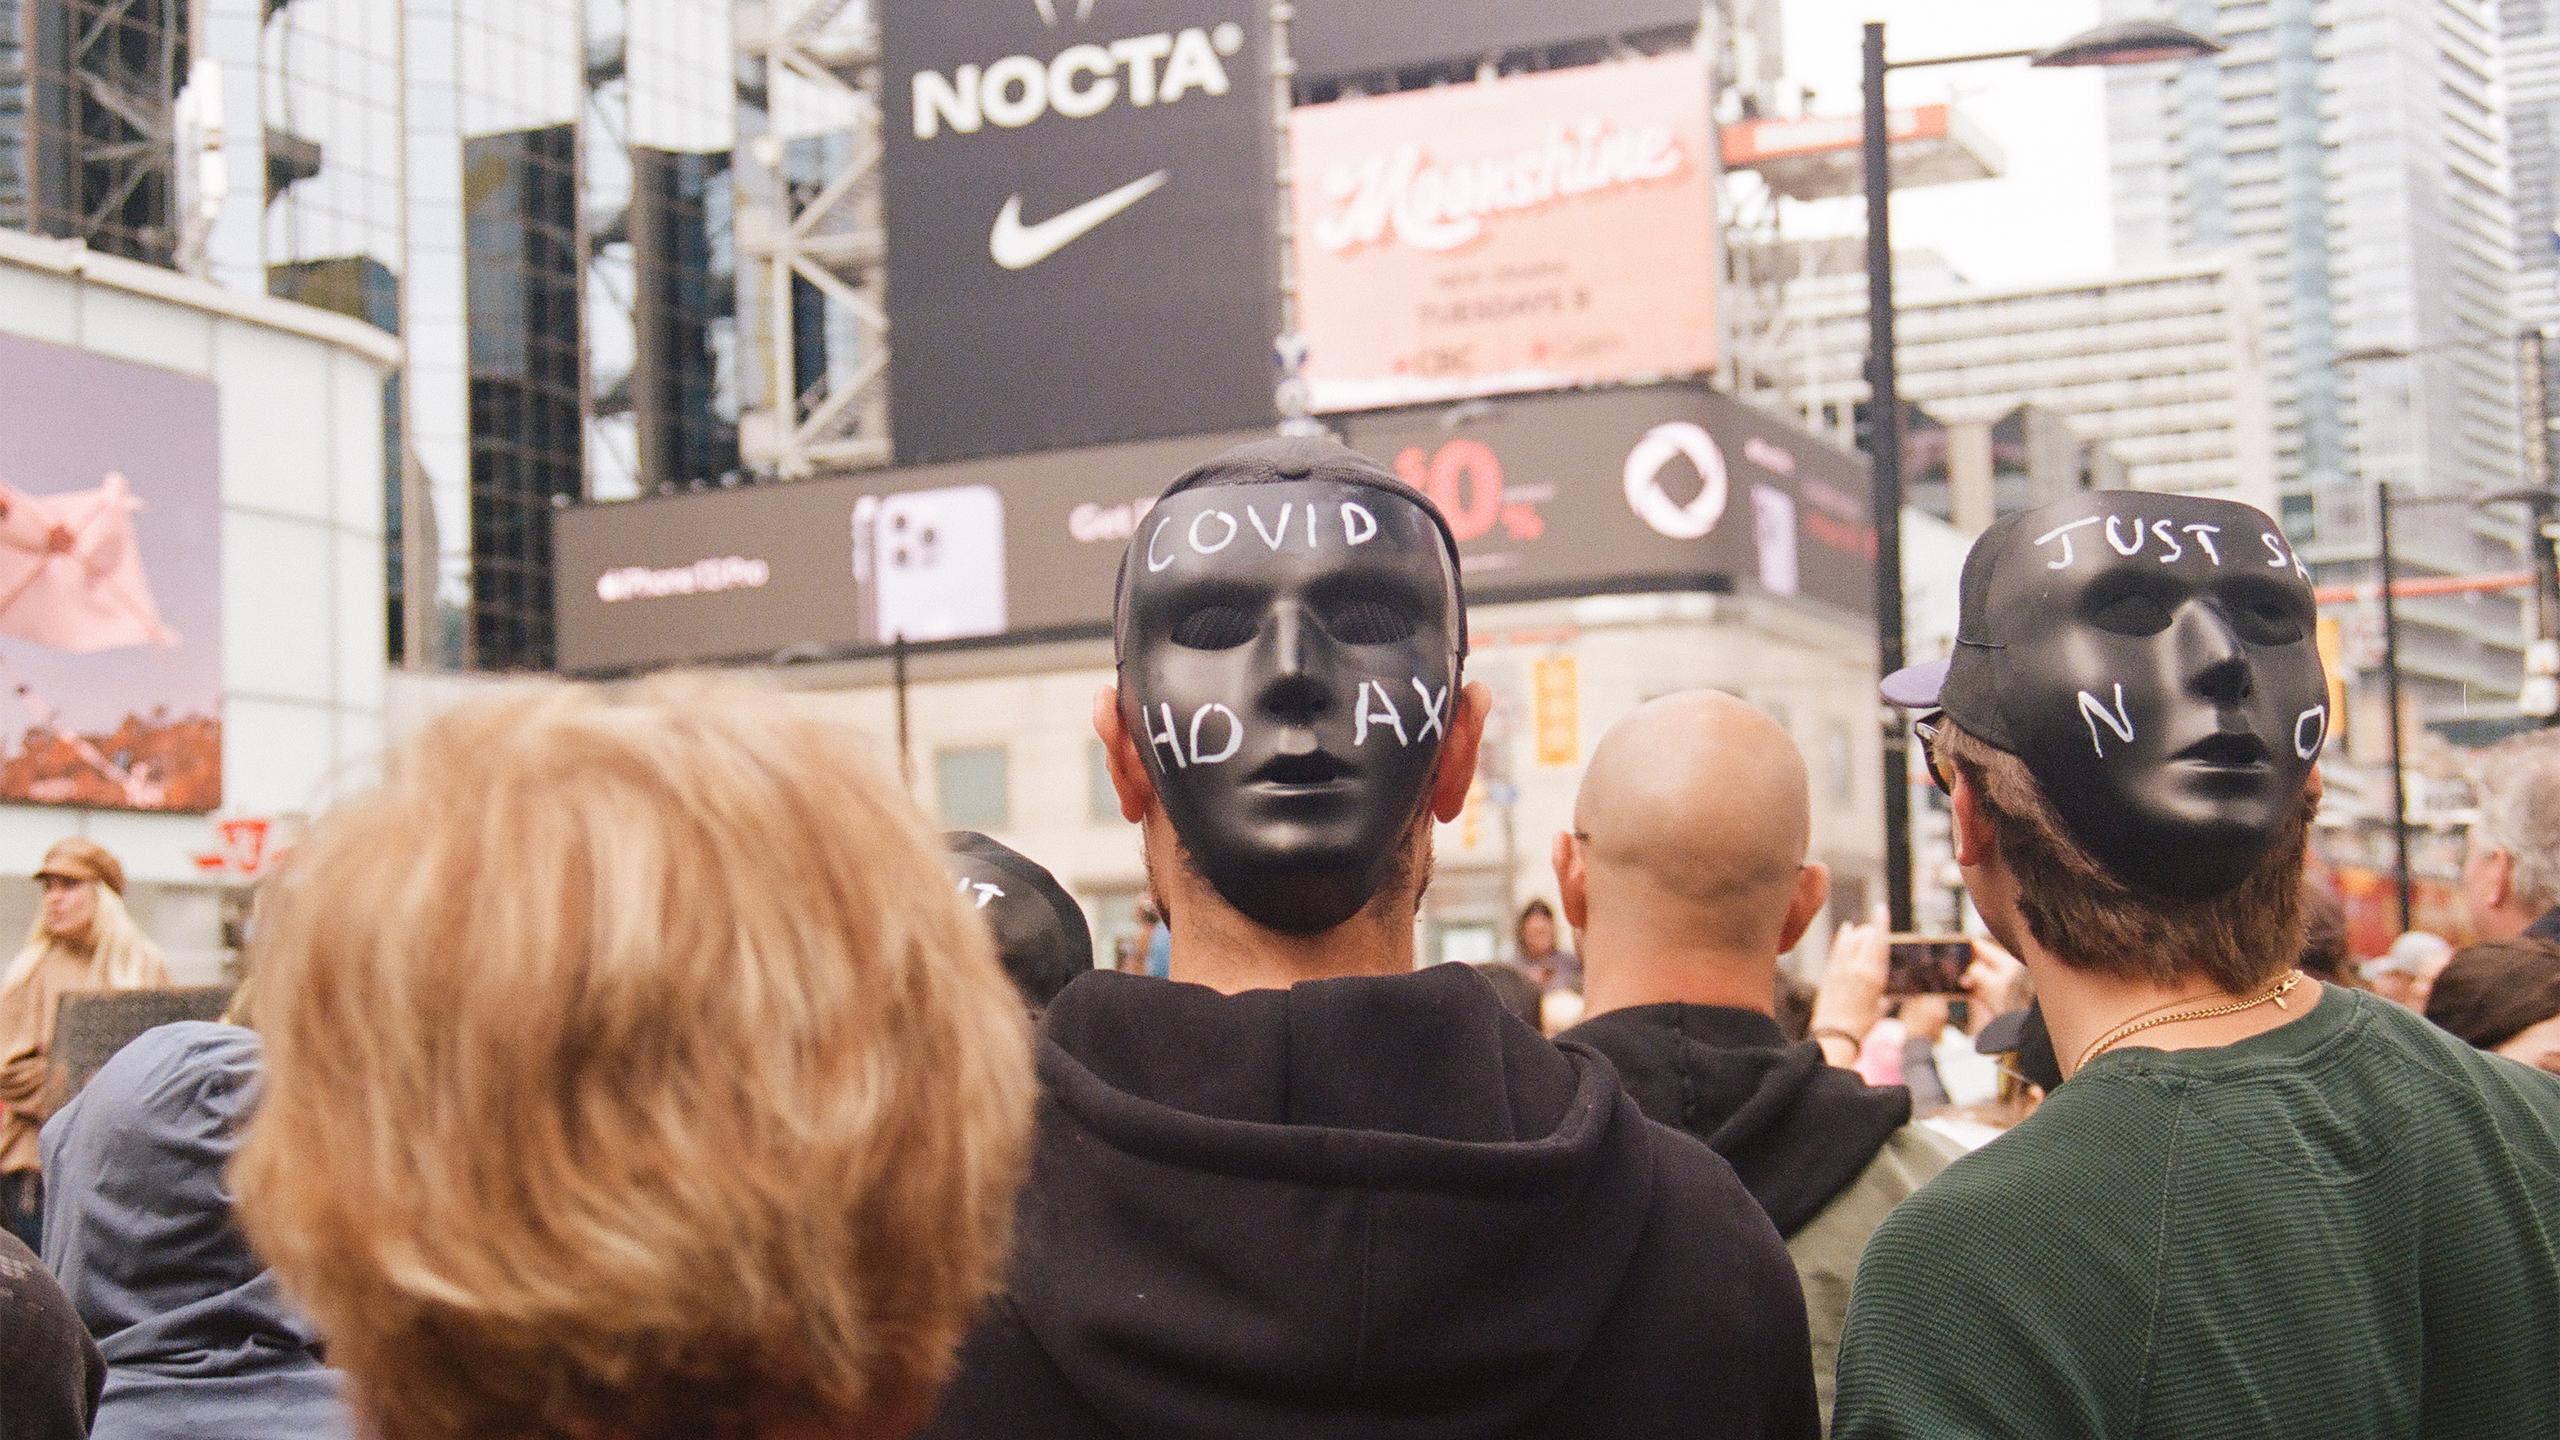 Demonstrators wear masks on the back of their heads during speeches at an anti-vaccine rally in Yonge-Dundas Square on Sept. 25.